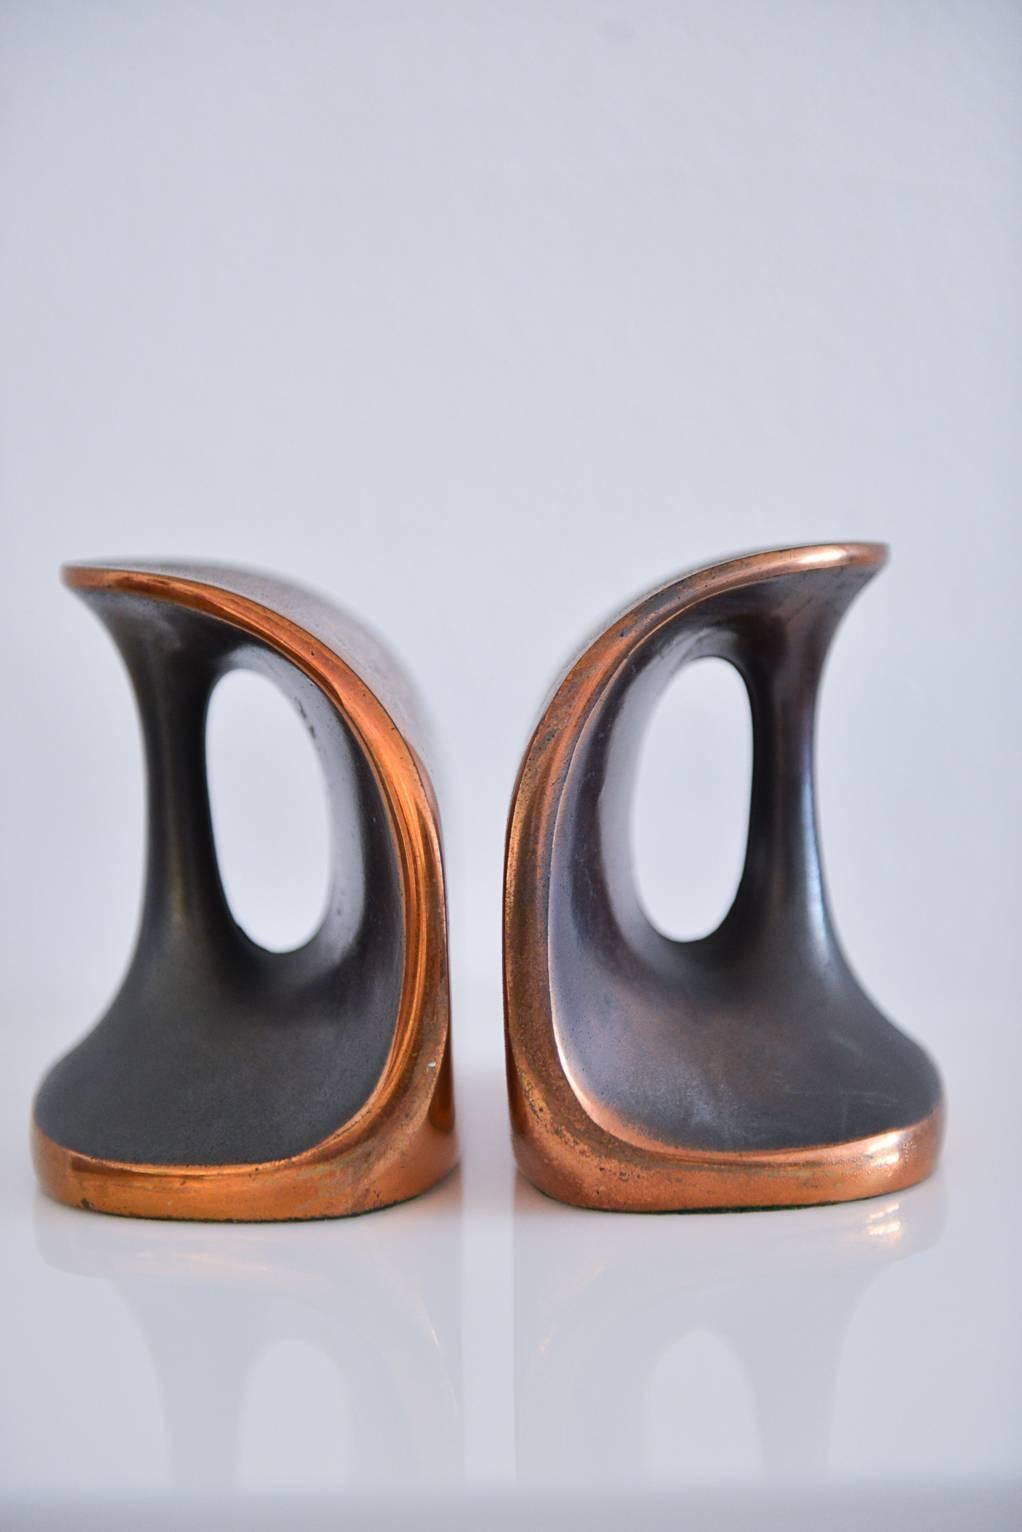 Beautiful pair of copper plated bookends by Ben Seibel for Jenfredware, circa 1950s. Very good vintage condition with original patina. Rare shape.

Measures: 3.5